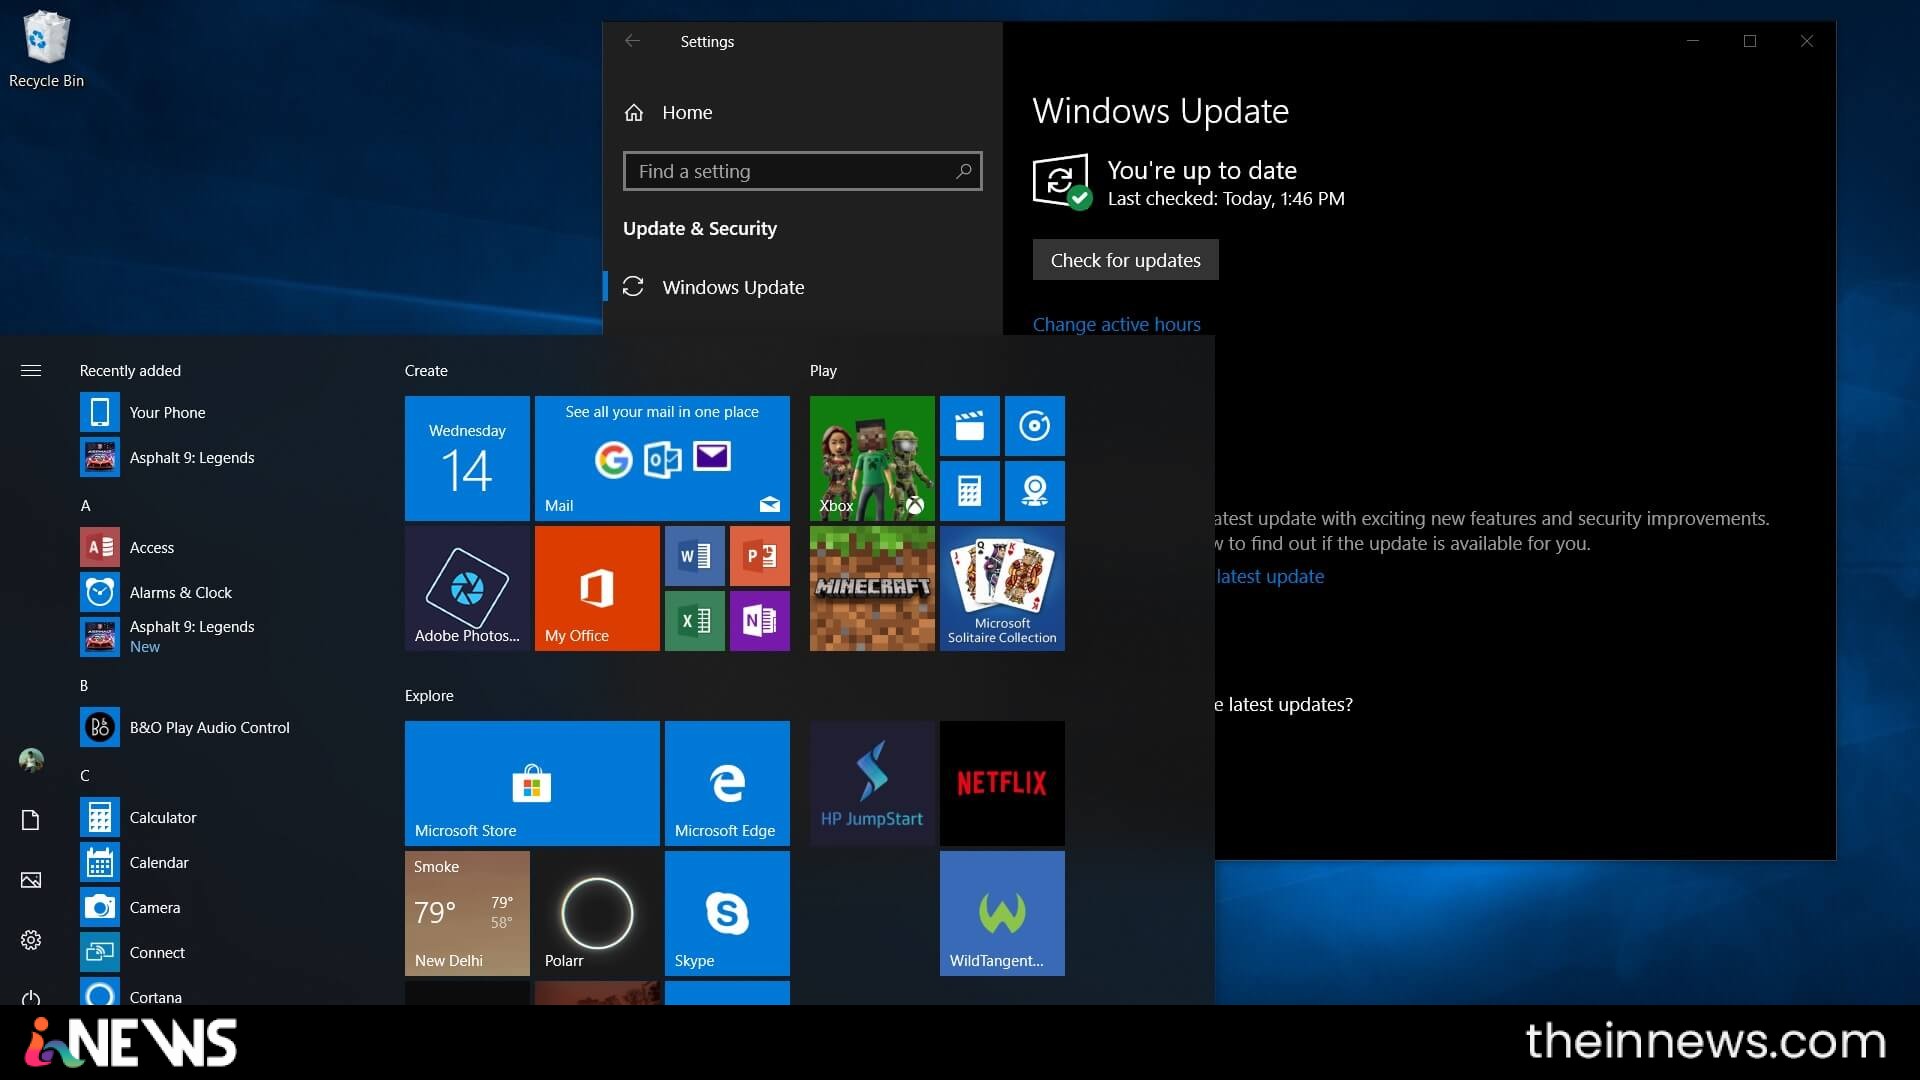 Windows 10 May 2019 Update gets a new Windows Update feature